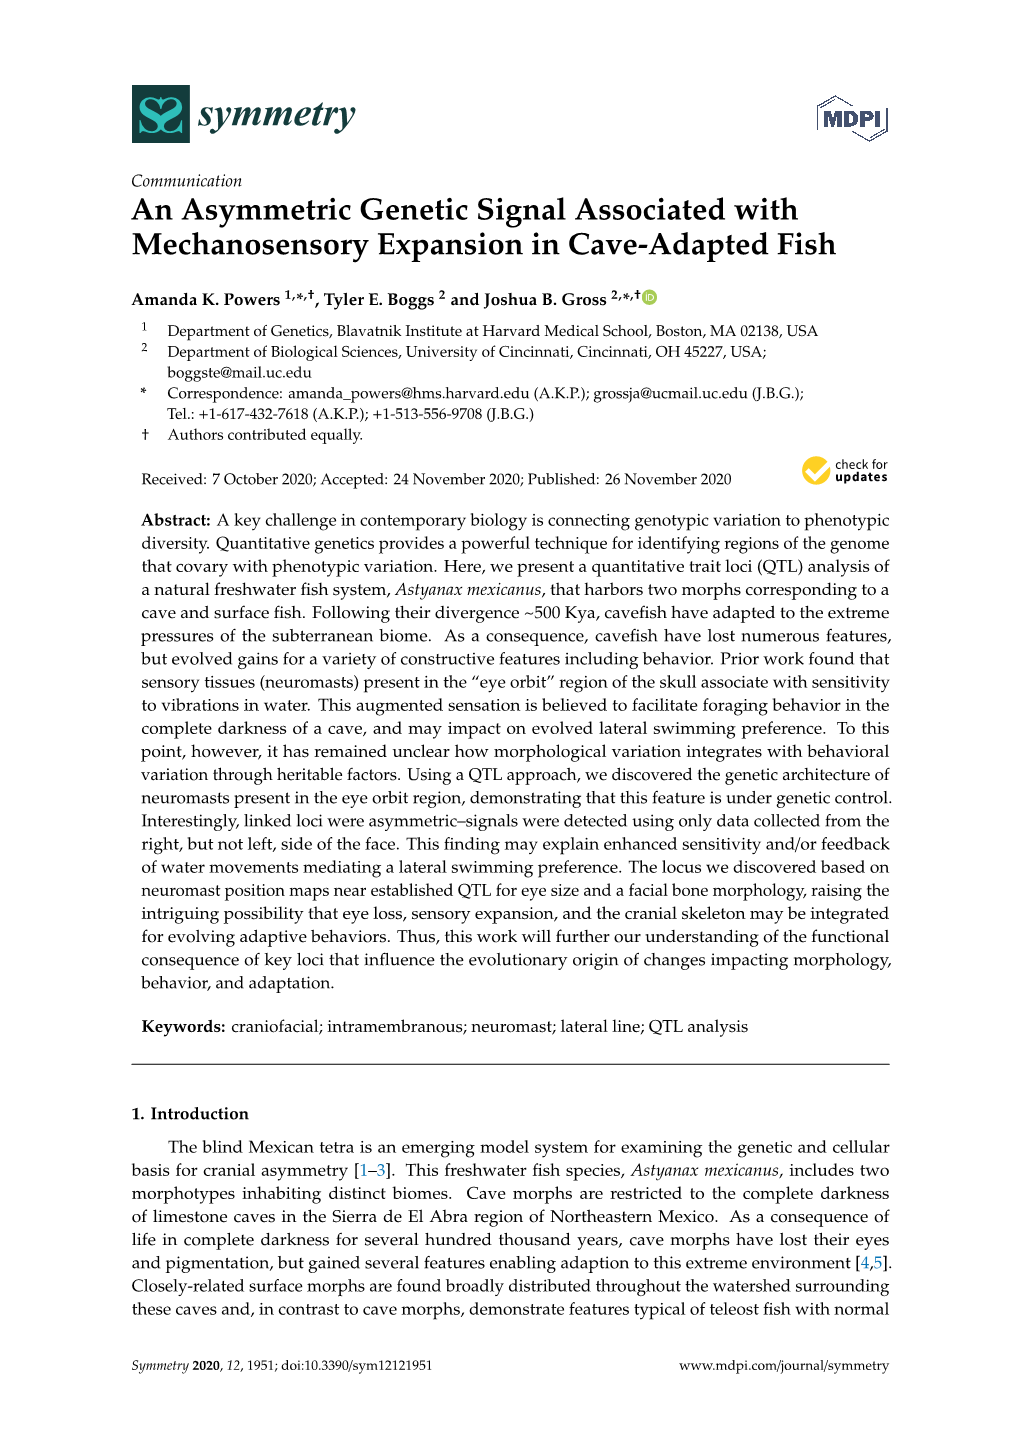 An Asymmetric Genetic Signal Associated with Mechanosensory Expansion in Cave-Adapted Fish